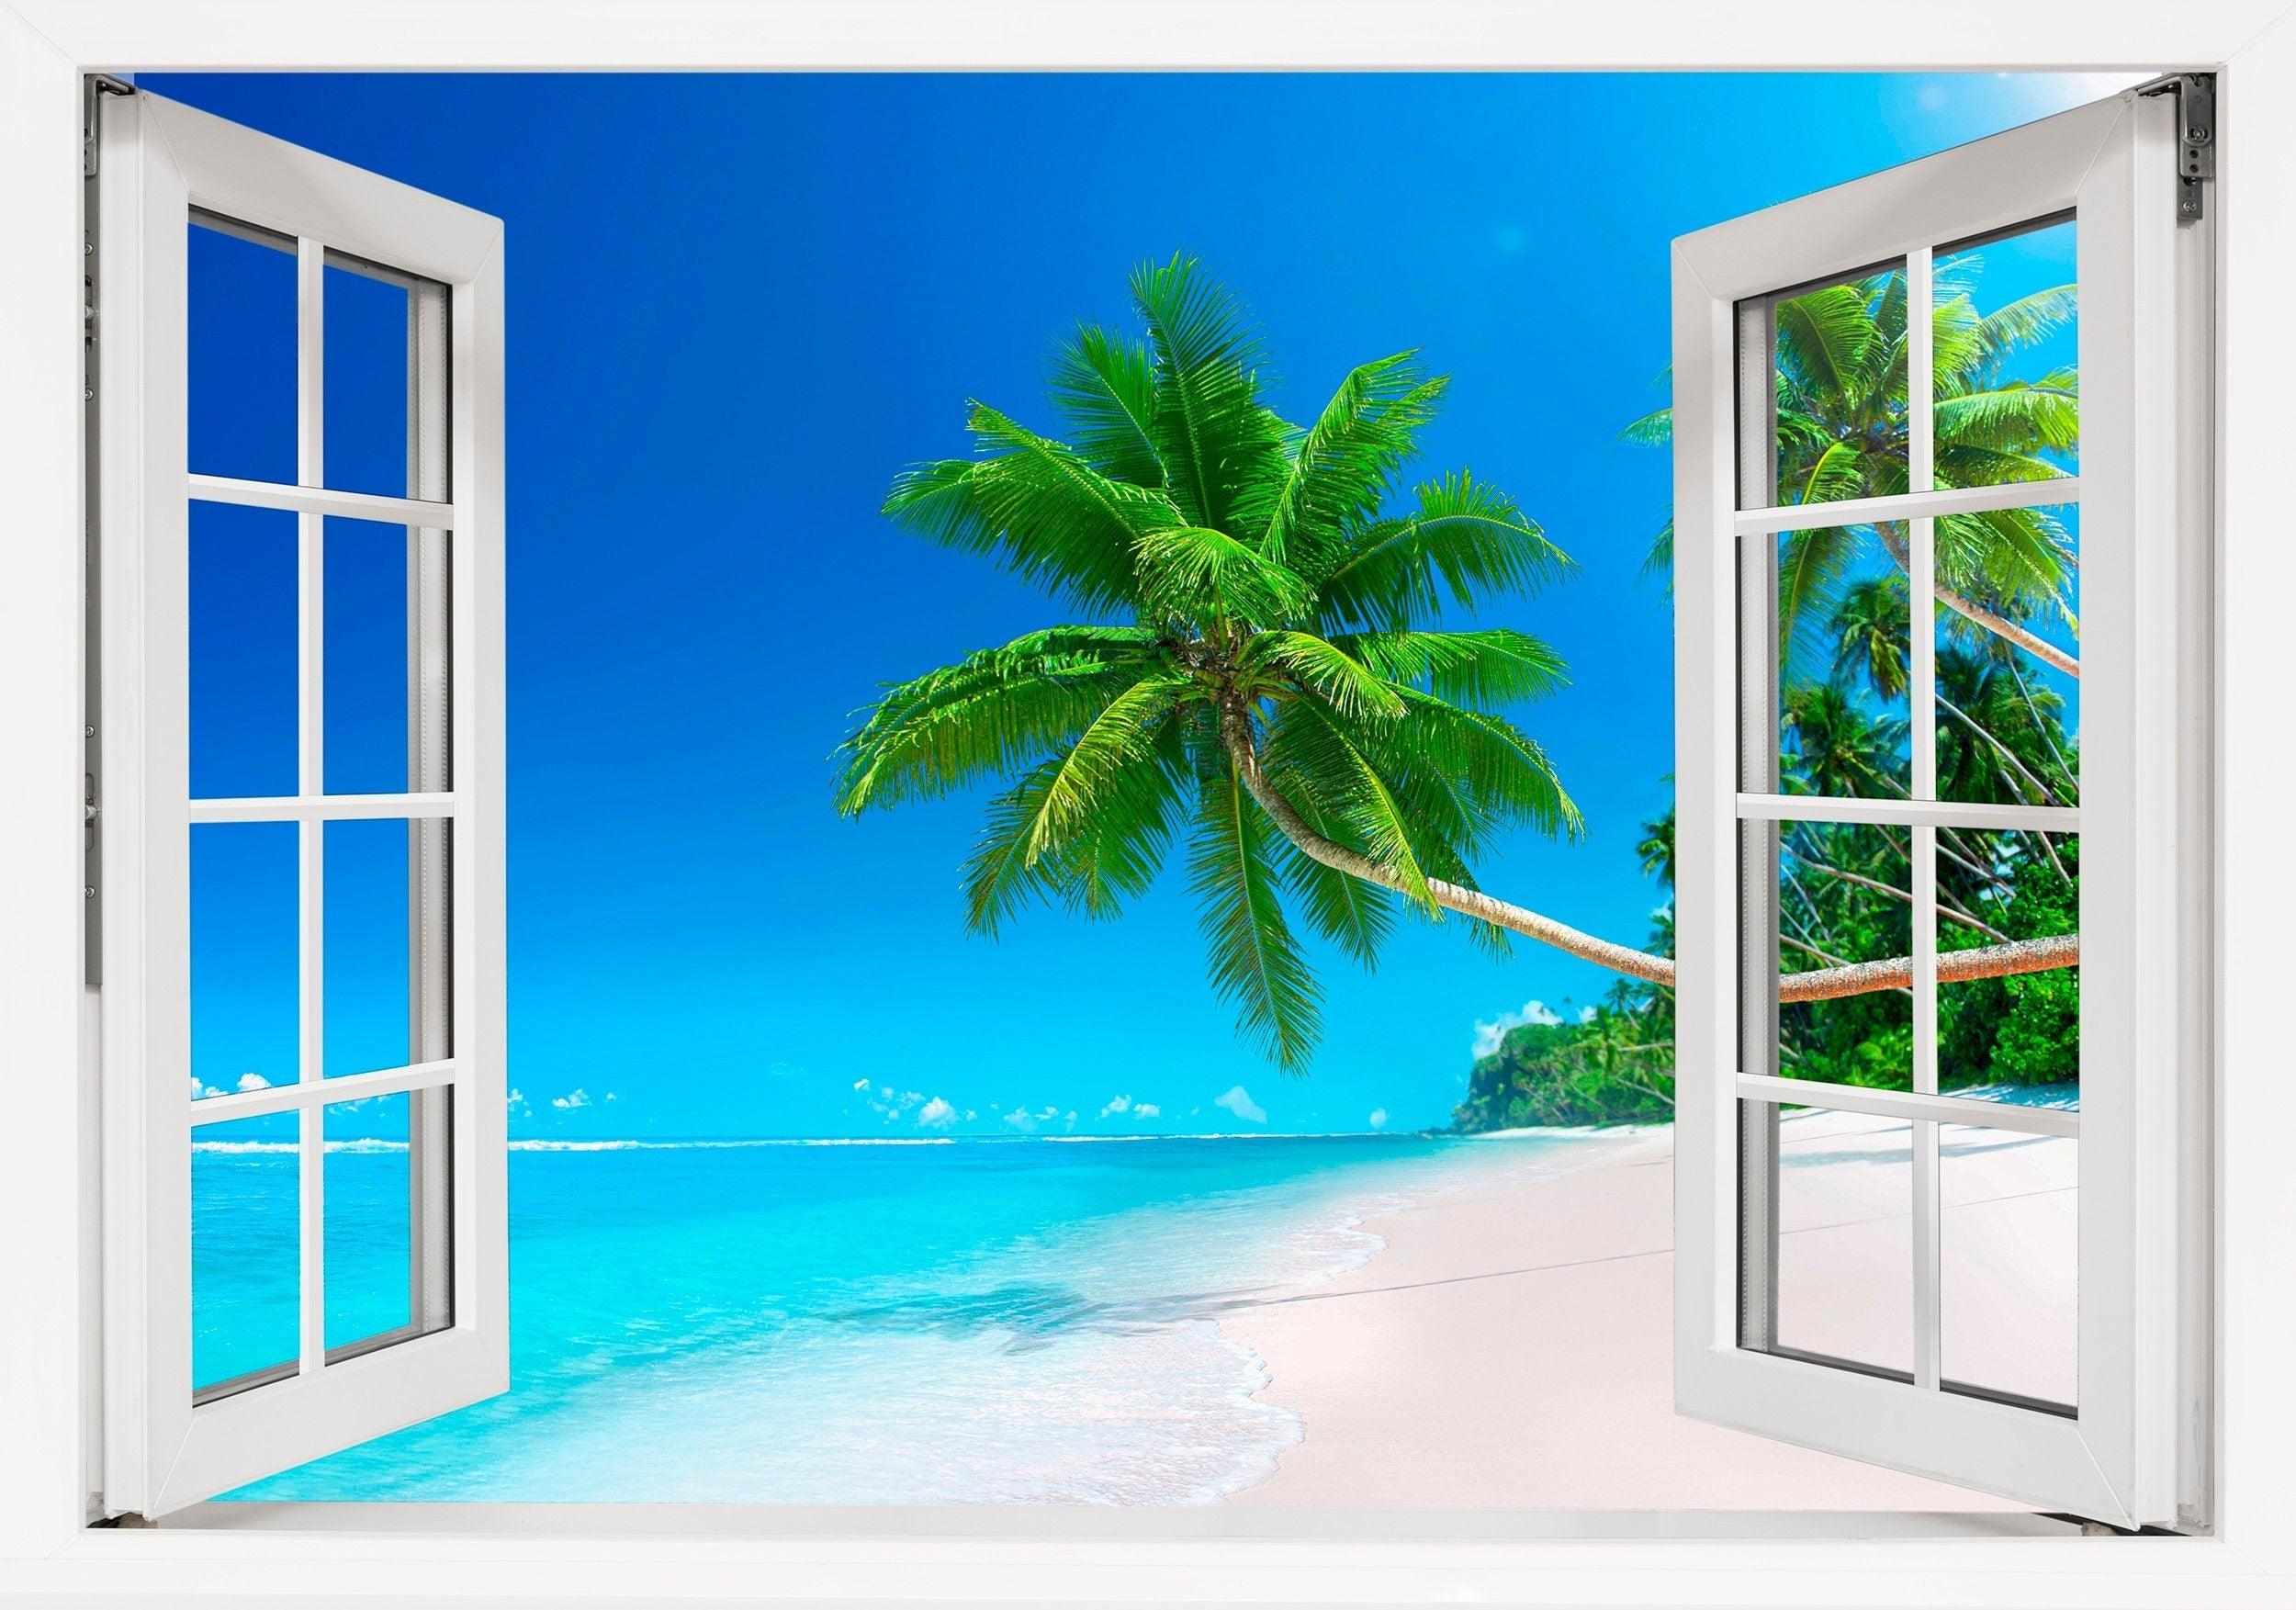 Window Scape Beach Palm Tree over white Sand #26, Window Decal, Sticker Sunset, Removable, Fabric, Window Frame, Office, Bedroom, 3D